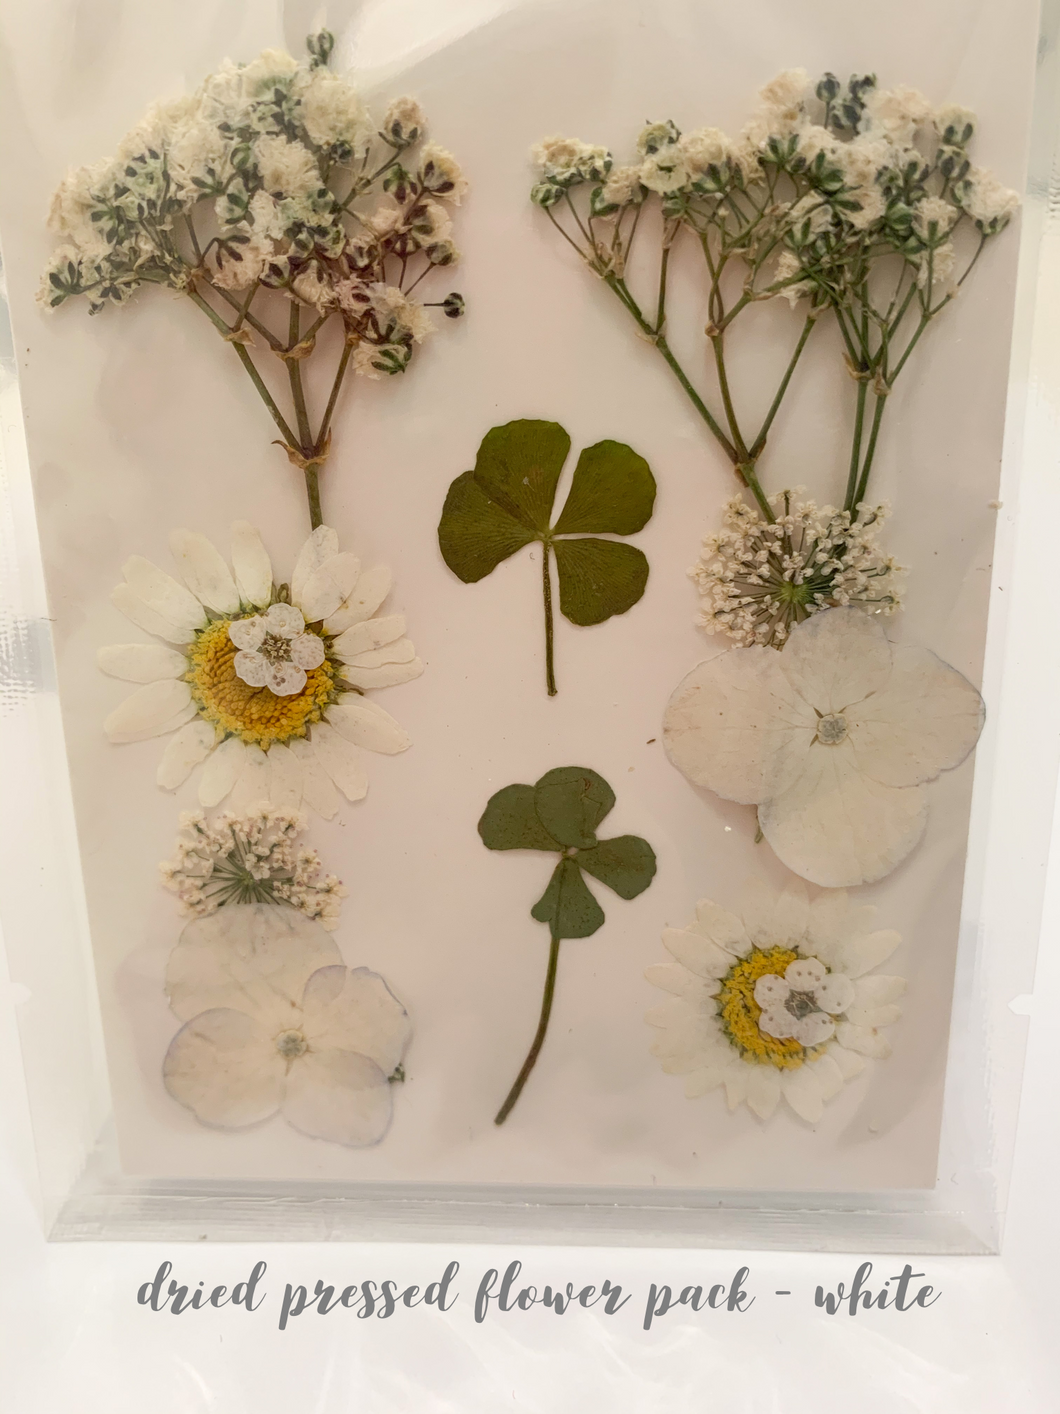 Small Dried Pressed Flower Pack - White